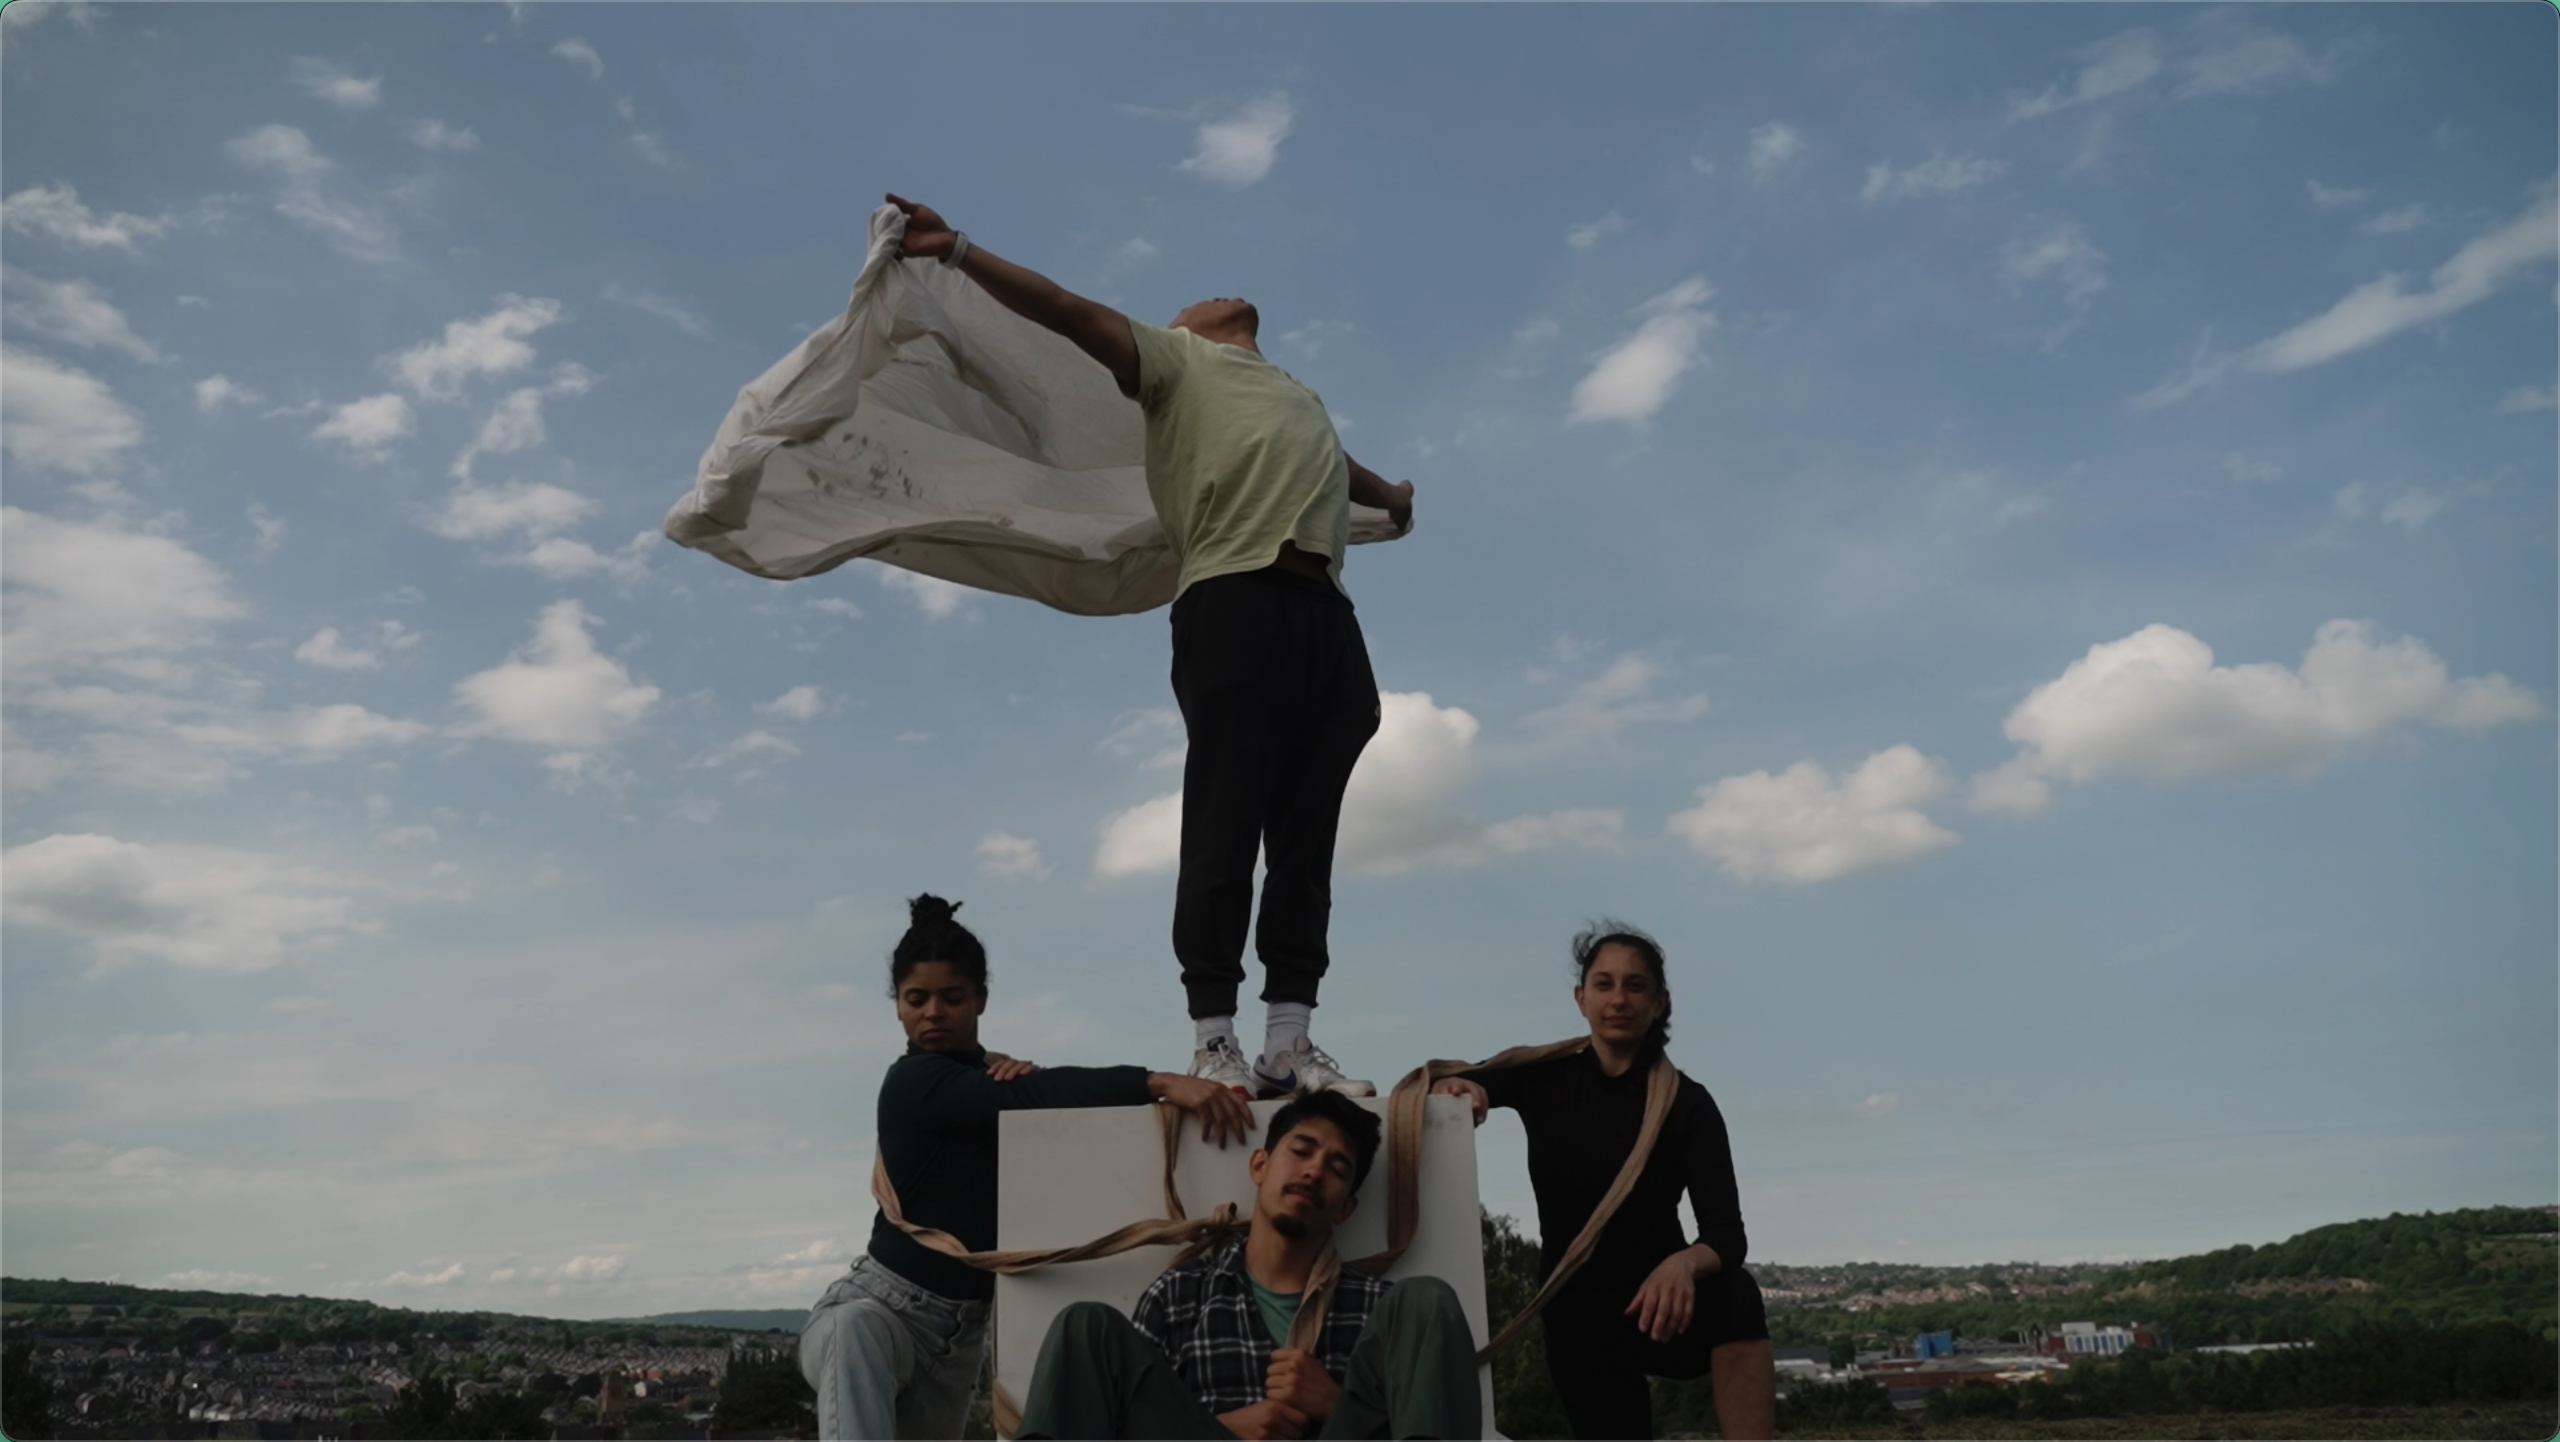 An outdoor film scene of 4 people shot against a blue sky on a hillside. There is a town in the background. They are performing in pose.